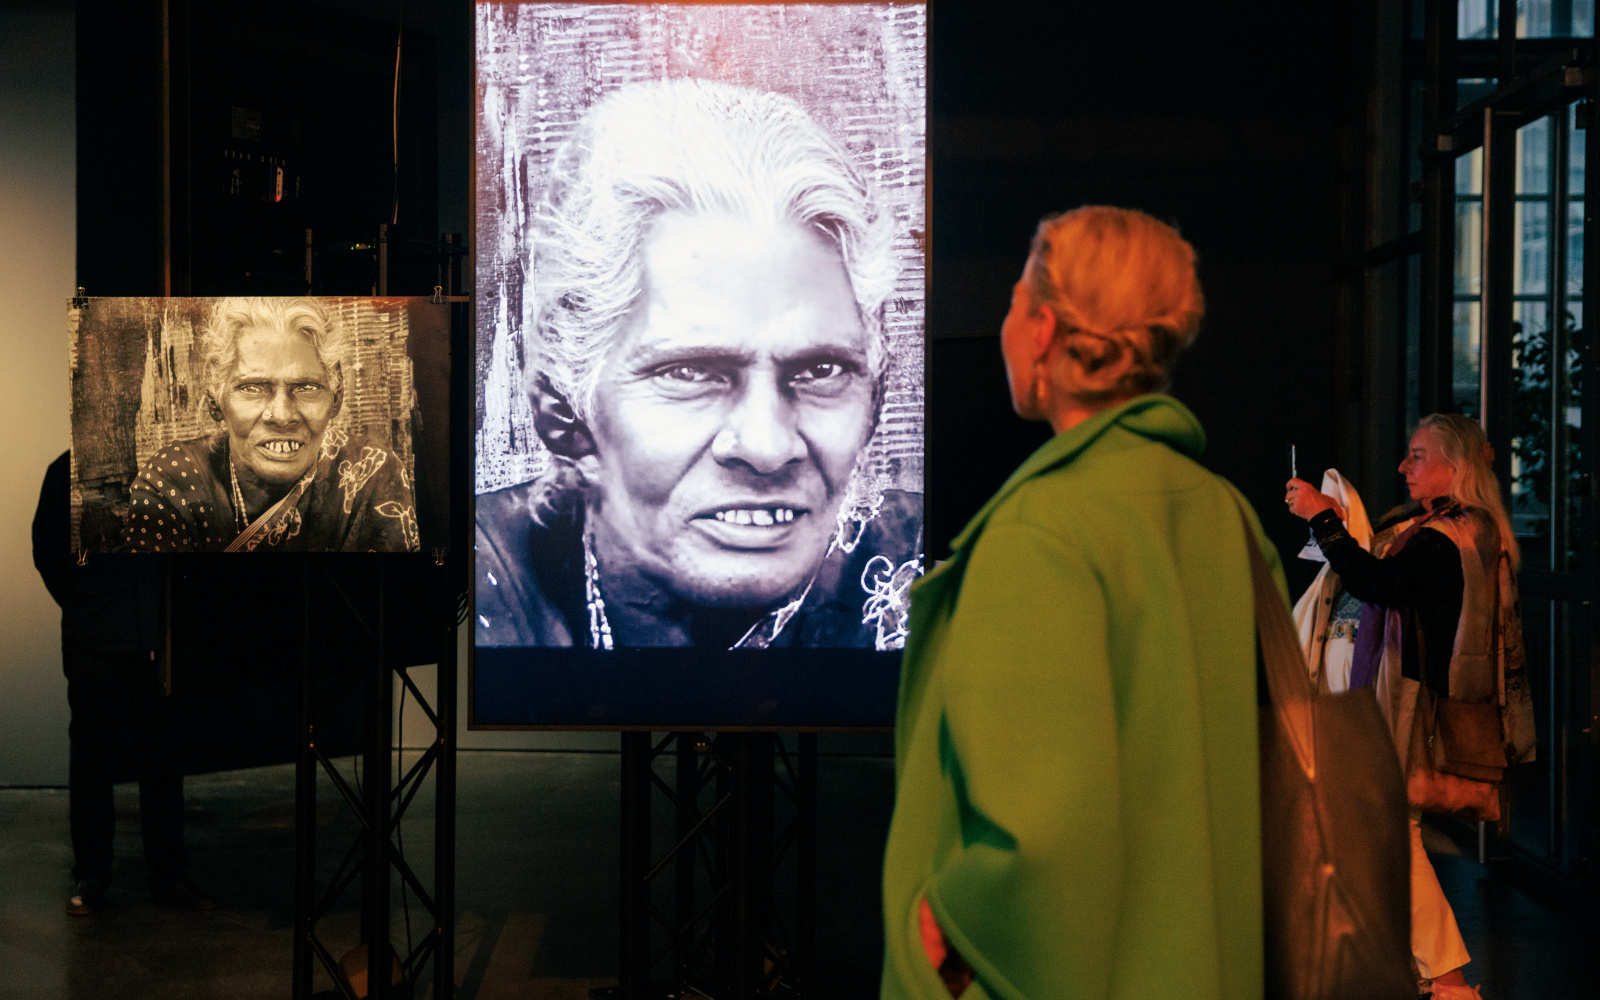 »Katharina John: Talking Heads« at ZKM | Karlsruhe, 2022. There are two screens showing an older woman.